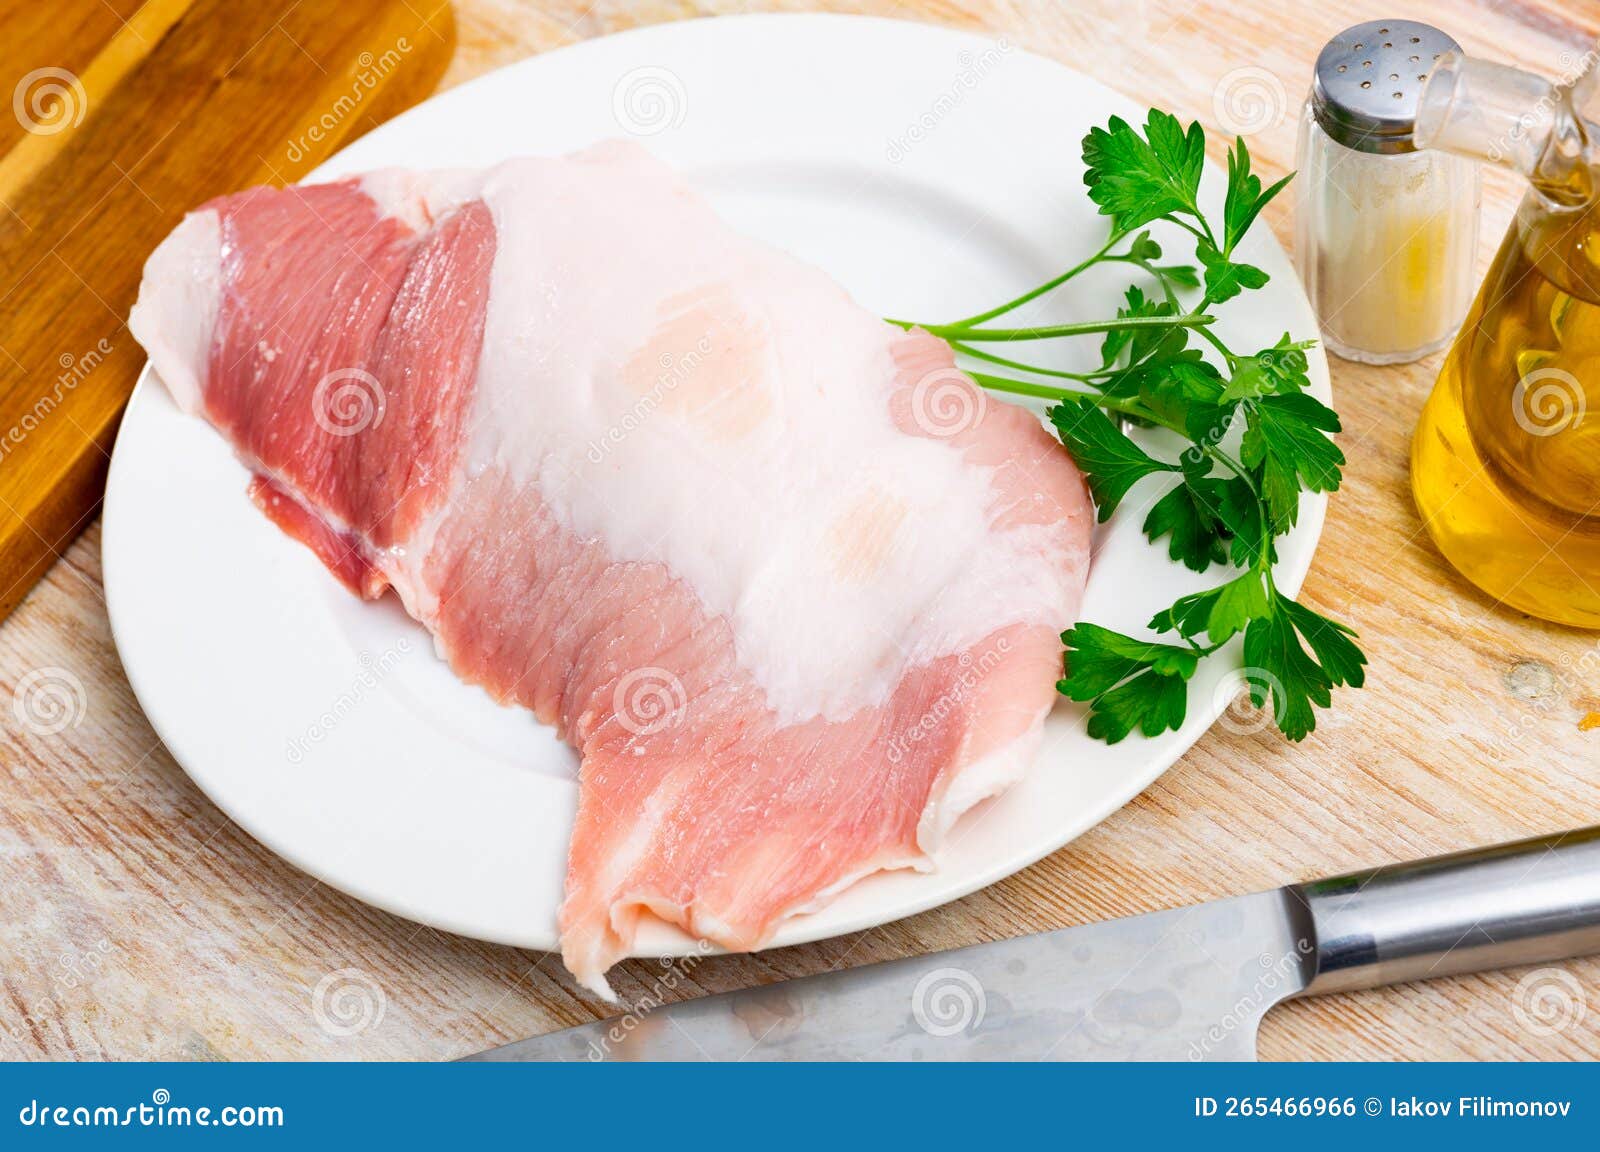 raw pork secreto fillet and condiments prepared for roasting on plate